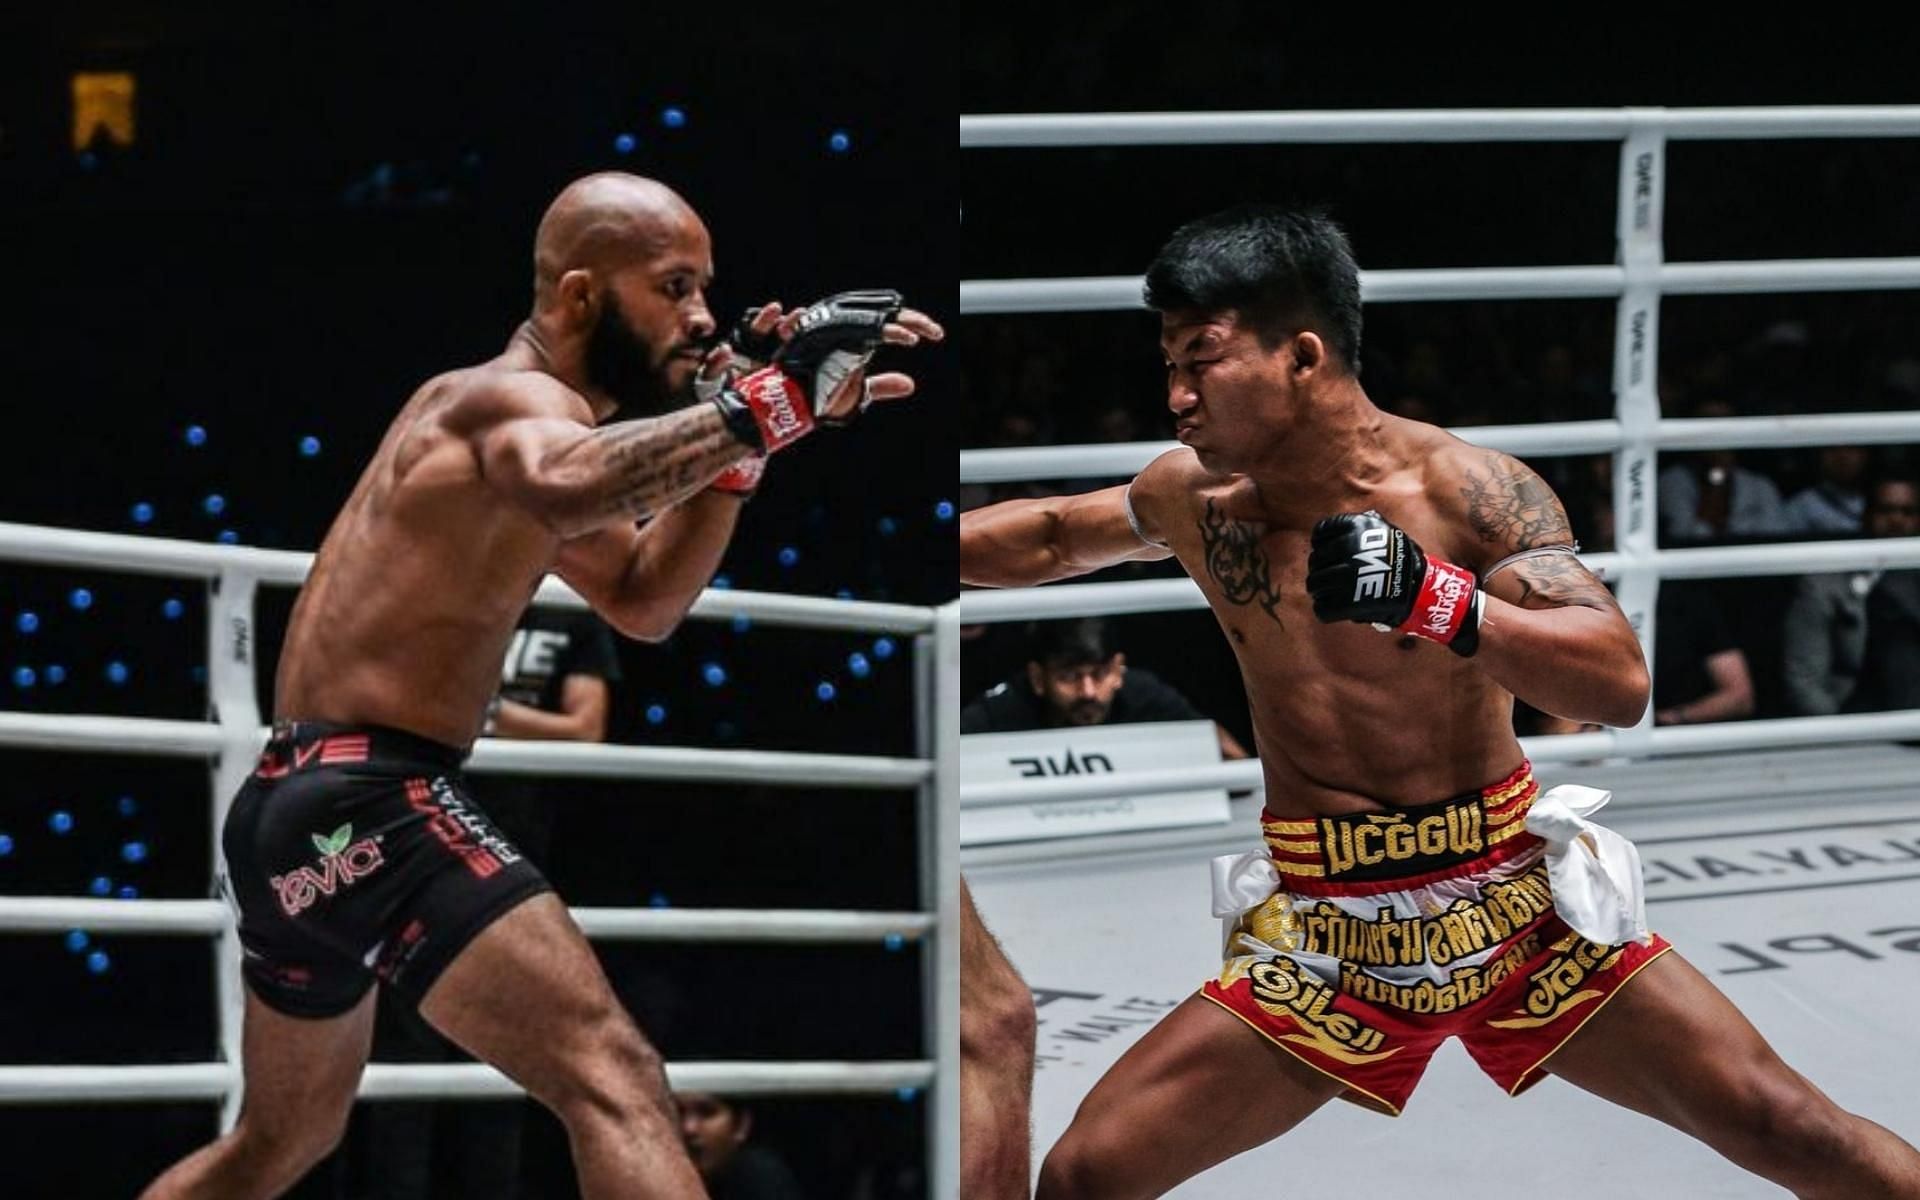 Demetrious Johnson (left) will face Rodtang Jitmuangon (right) in a mixed-rules bout at ONE X. (Images courtesy of ONE Championship)